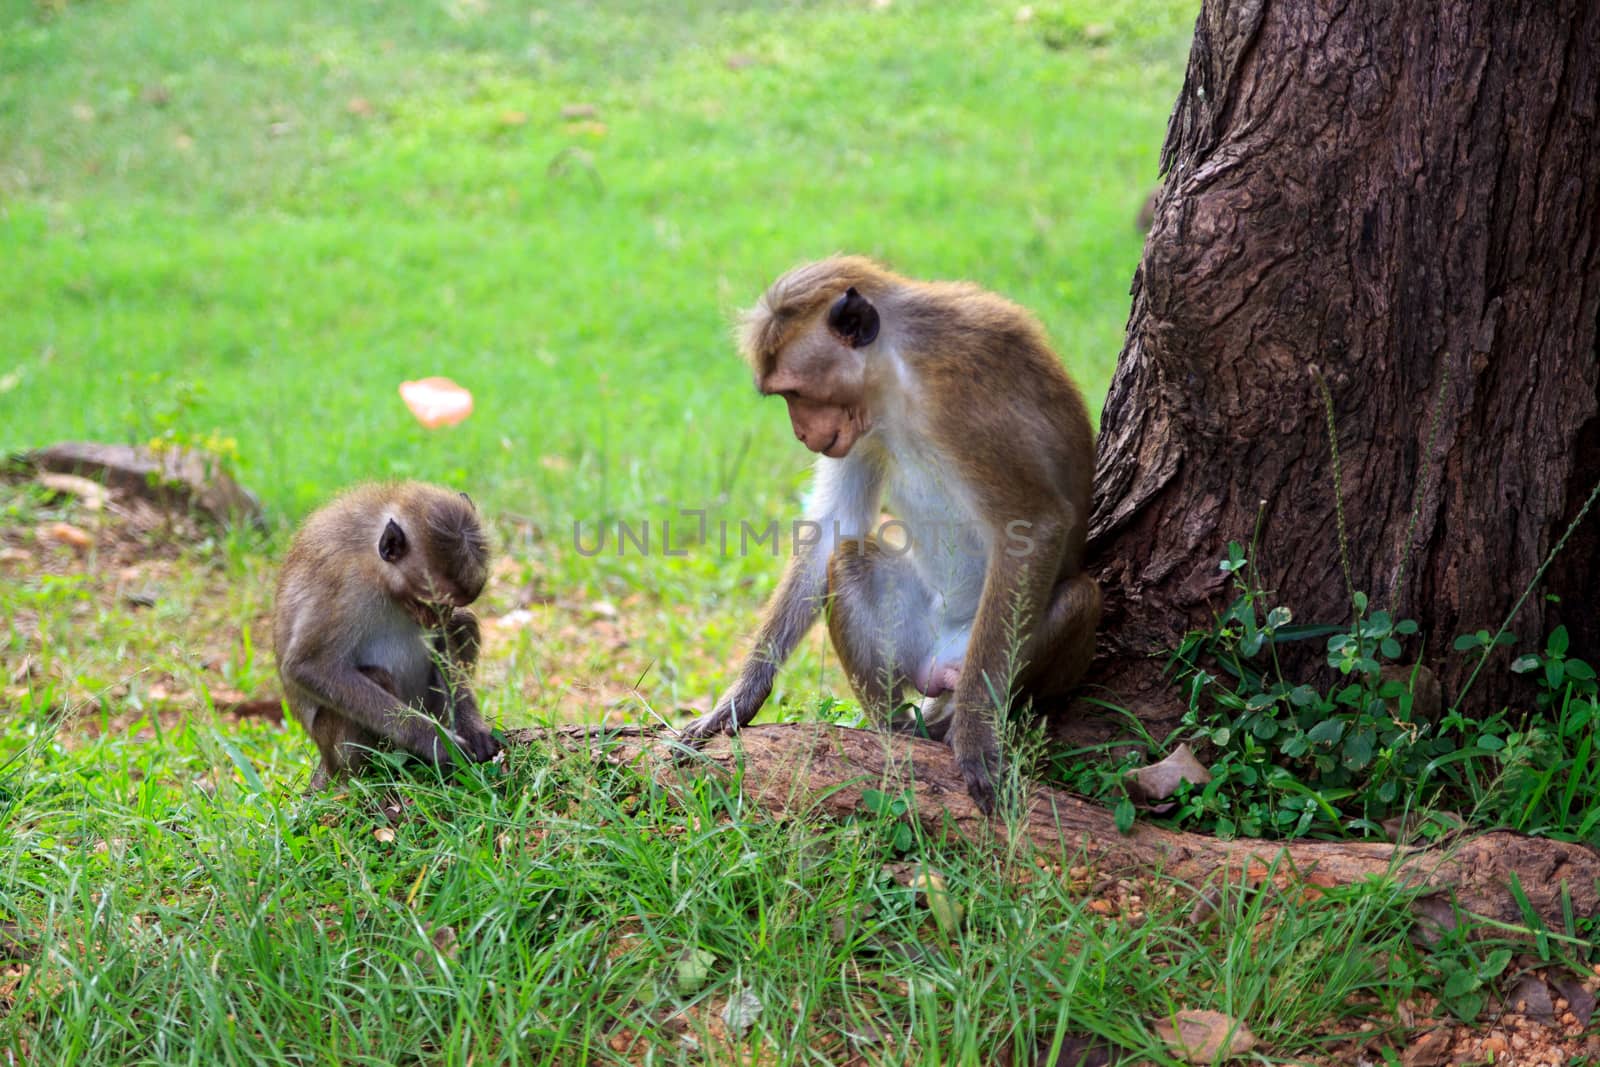 Rhesus macaques are familiar brown primates with red faces and rears. They have close-cropped hair on their heads, which accentuates their very expressive faces. Concept of urban wild animals